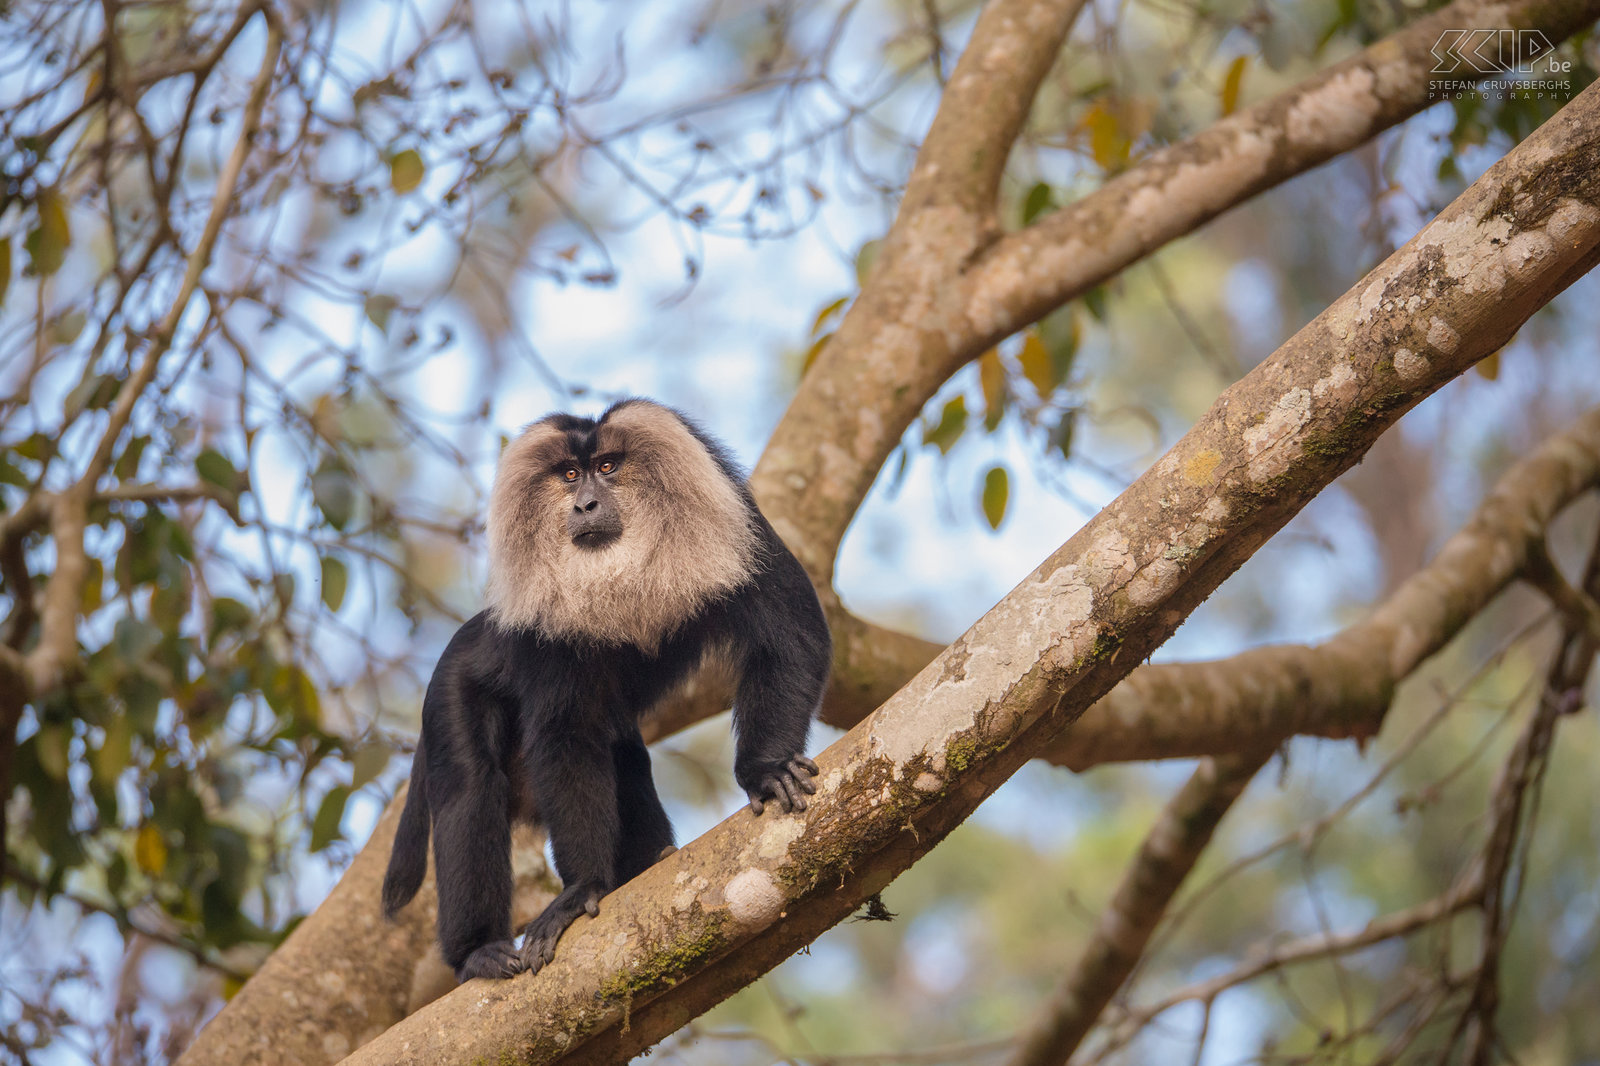 Valparai - Lion-tailed macaque The lion-tailed macaque or the wanderoo (Macaca silenus) is an endangered monkey that can be found in the forests of the teaplantions of Valparai. Stefan Cruysberghs